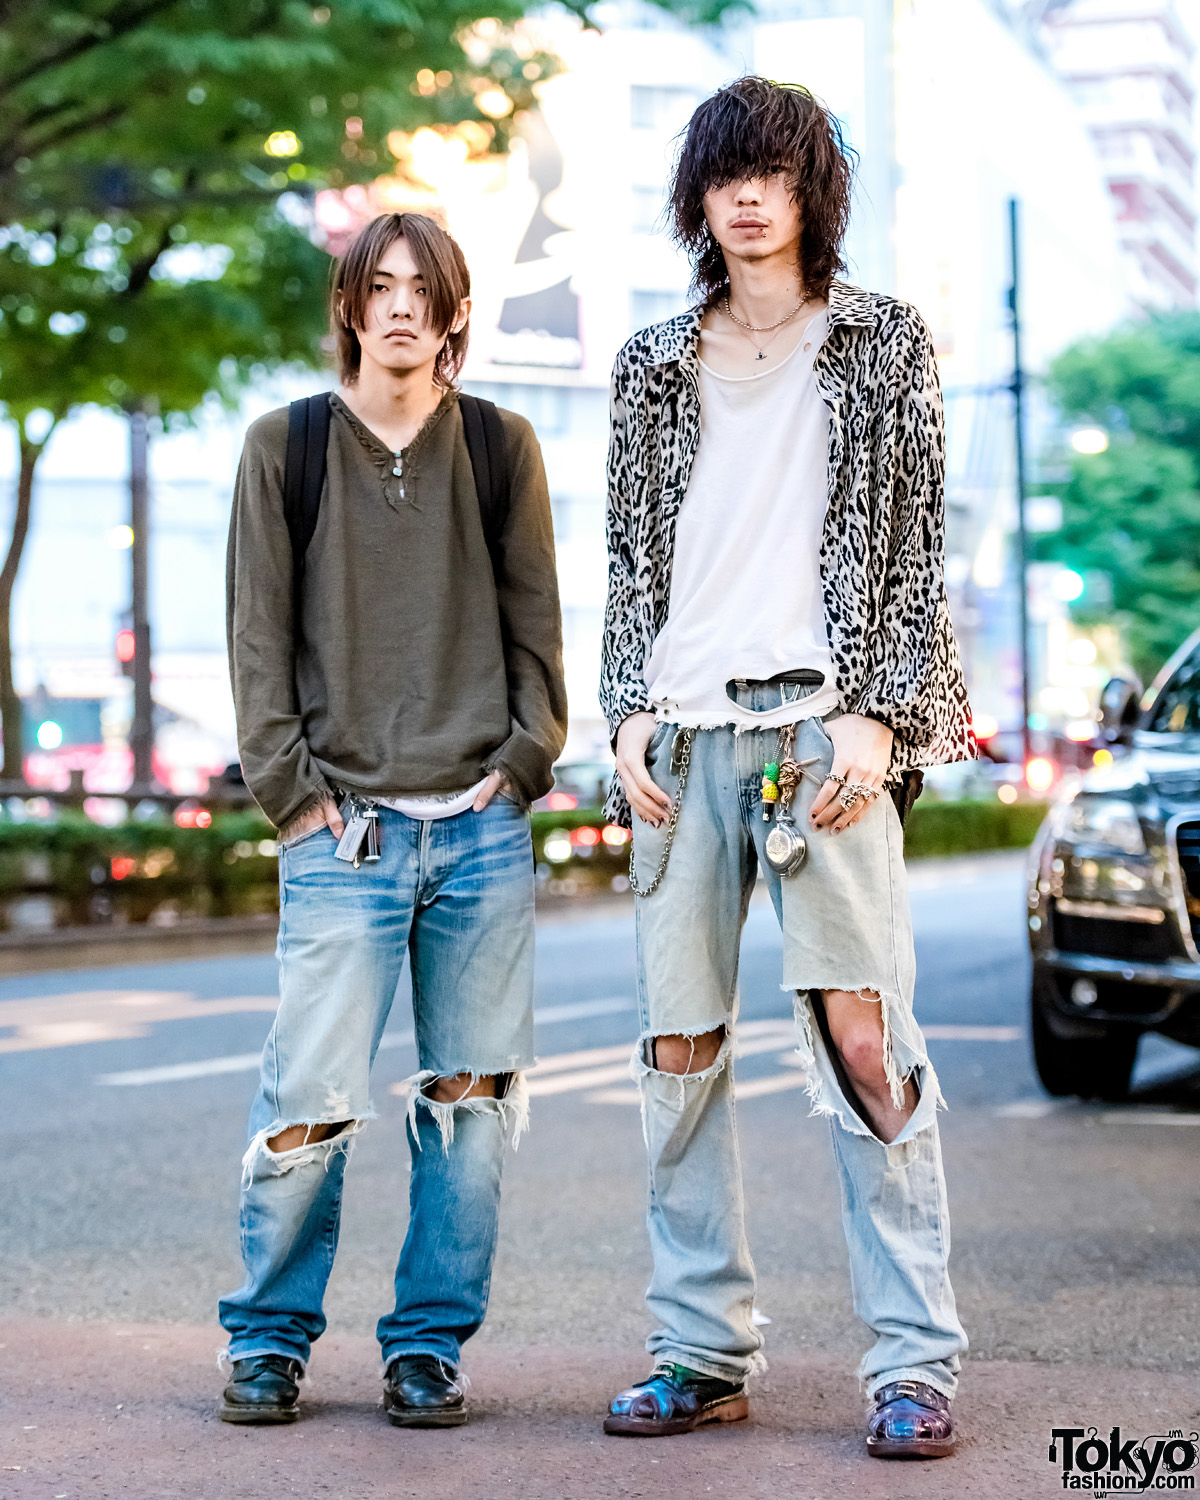 Harajuku Guys in Ripped Denim w/ Levi's, Hysteric Glamour, Bounty Hunter, Vivienne Westwood, Dr. Martens & Tokyo Human Experiments